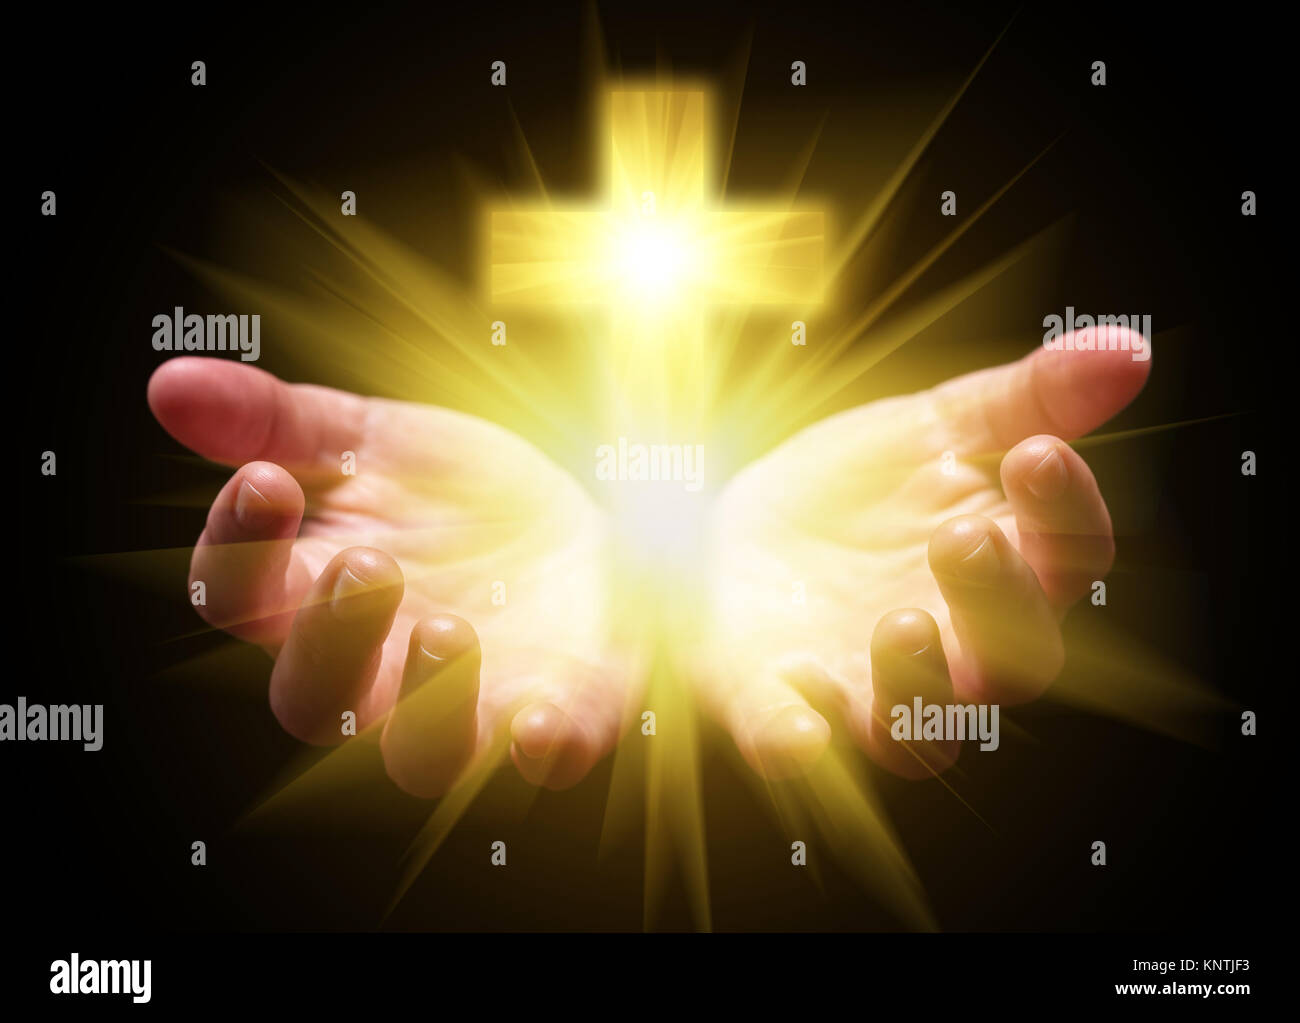 Hands cupped and holding or showing Cross or Crucifix with bright glowing shining light. Christian Christianity Catholic religion divine god celestial Stock Photo